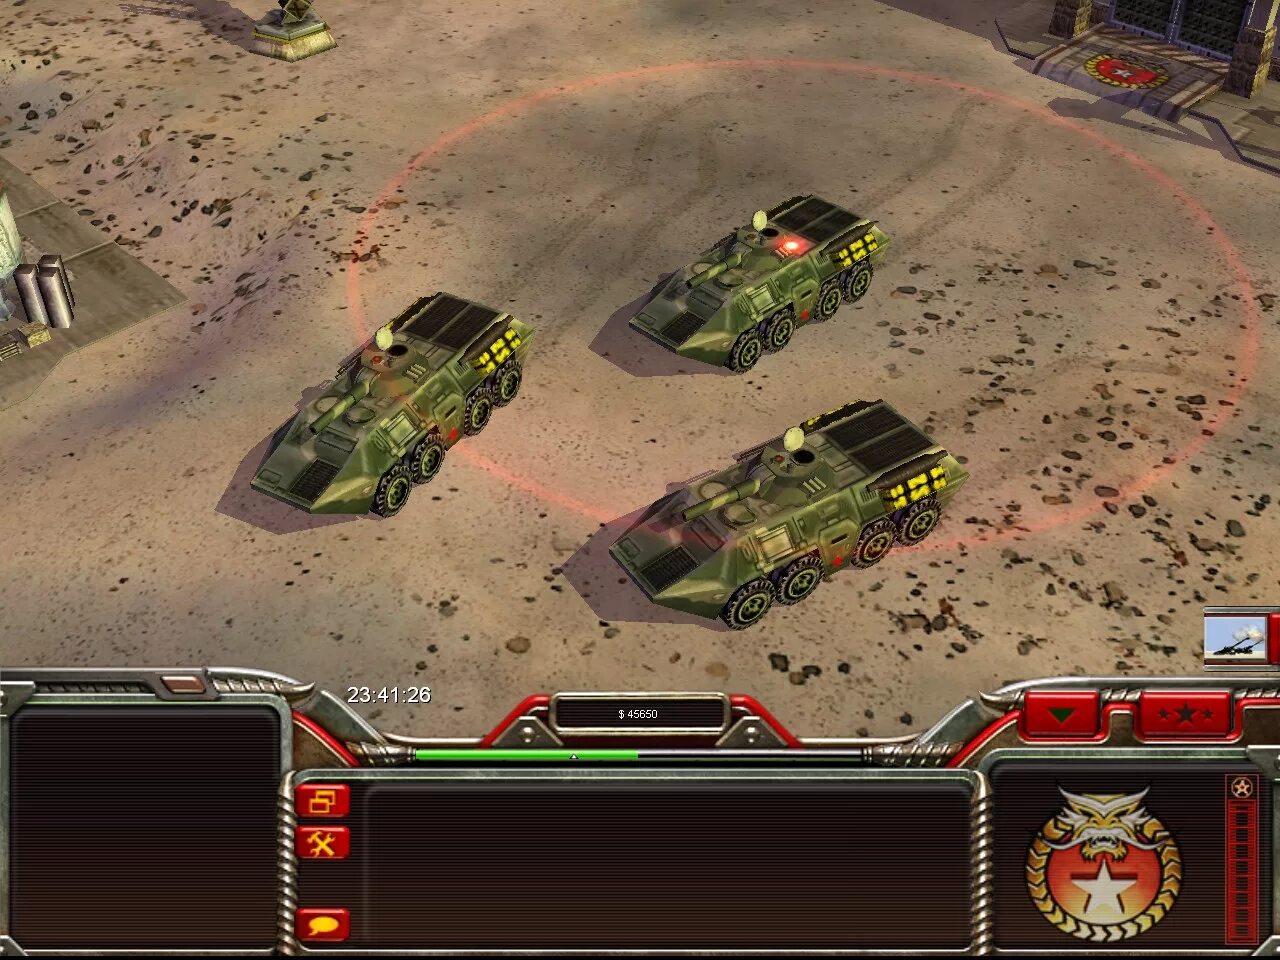 Command conquer читы. Command and Conquer Generals Мао. Command and Conquer Desert Storm 2. Command and Conquer Desert Storm. Command and Conquer Generals GLA генералы.